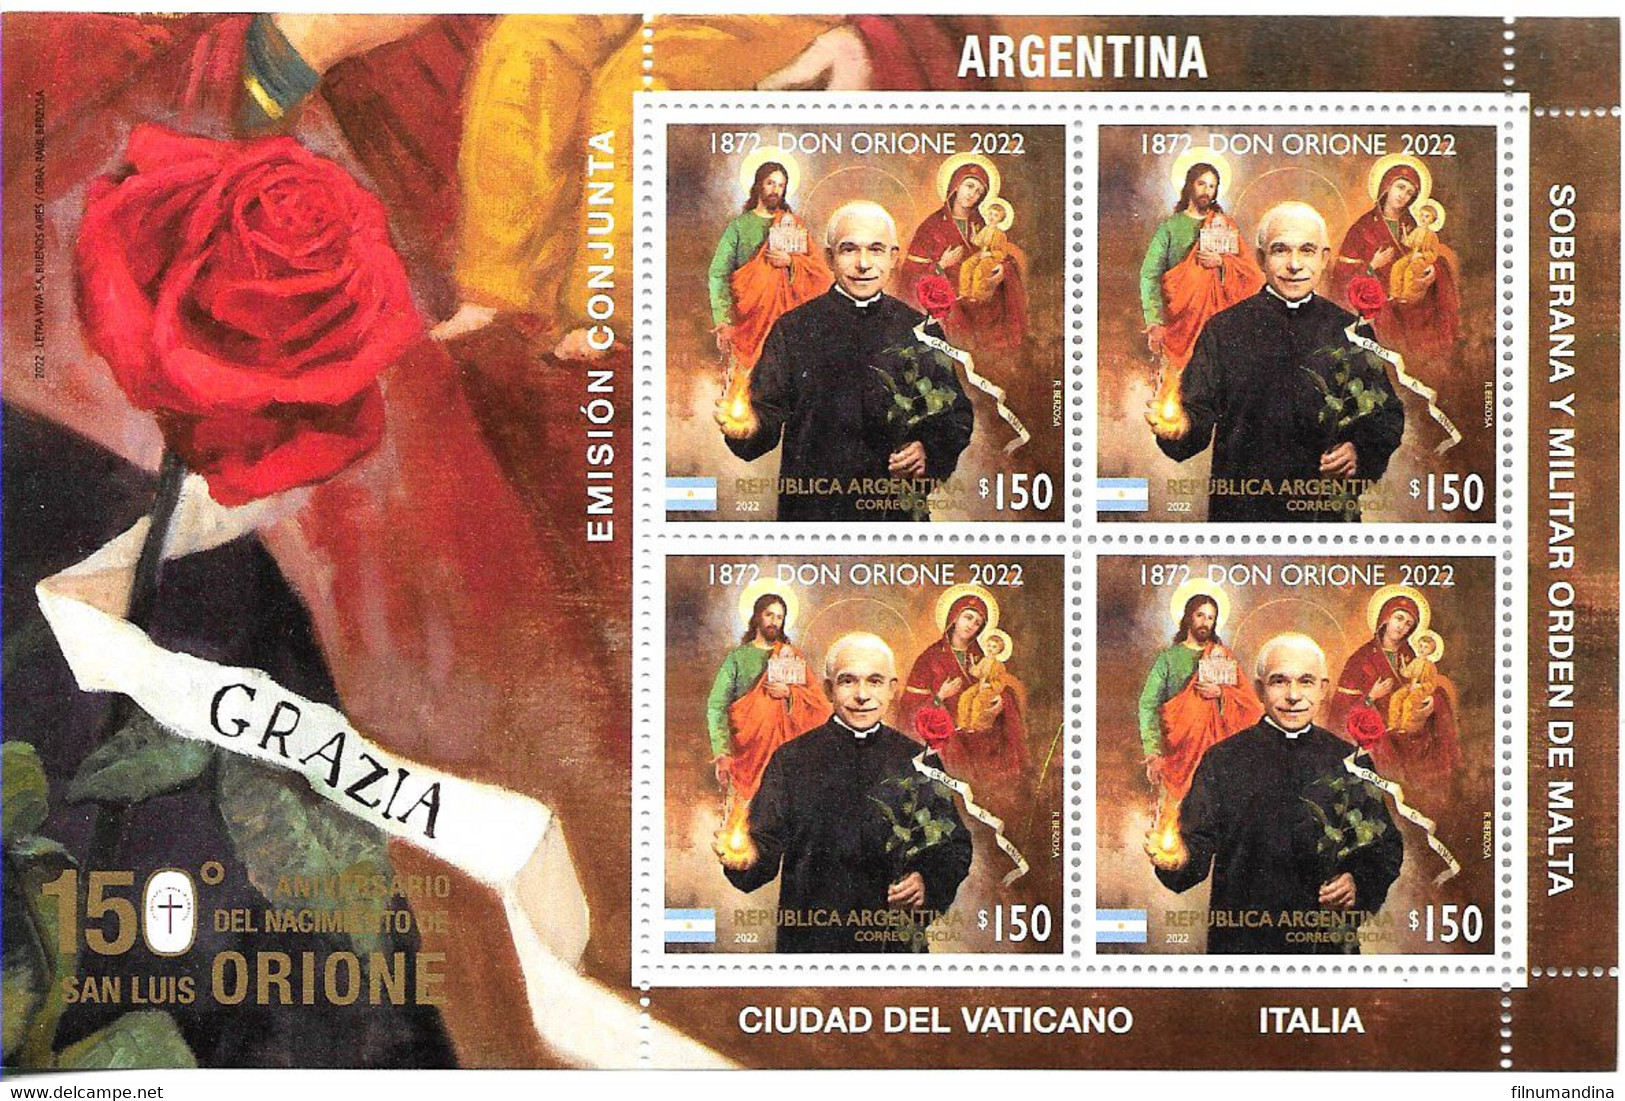 #75111 ARGENTINE,ARGENTINA 2022 DON ORIONE JOINT ISSUE ITALIA-VATICANO-S.O.MALTA S/S MNH                             MNH - Neufs